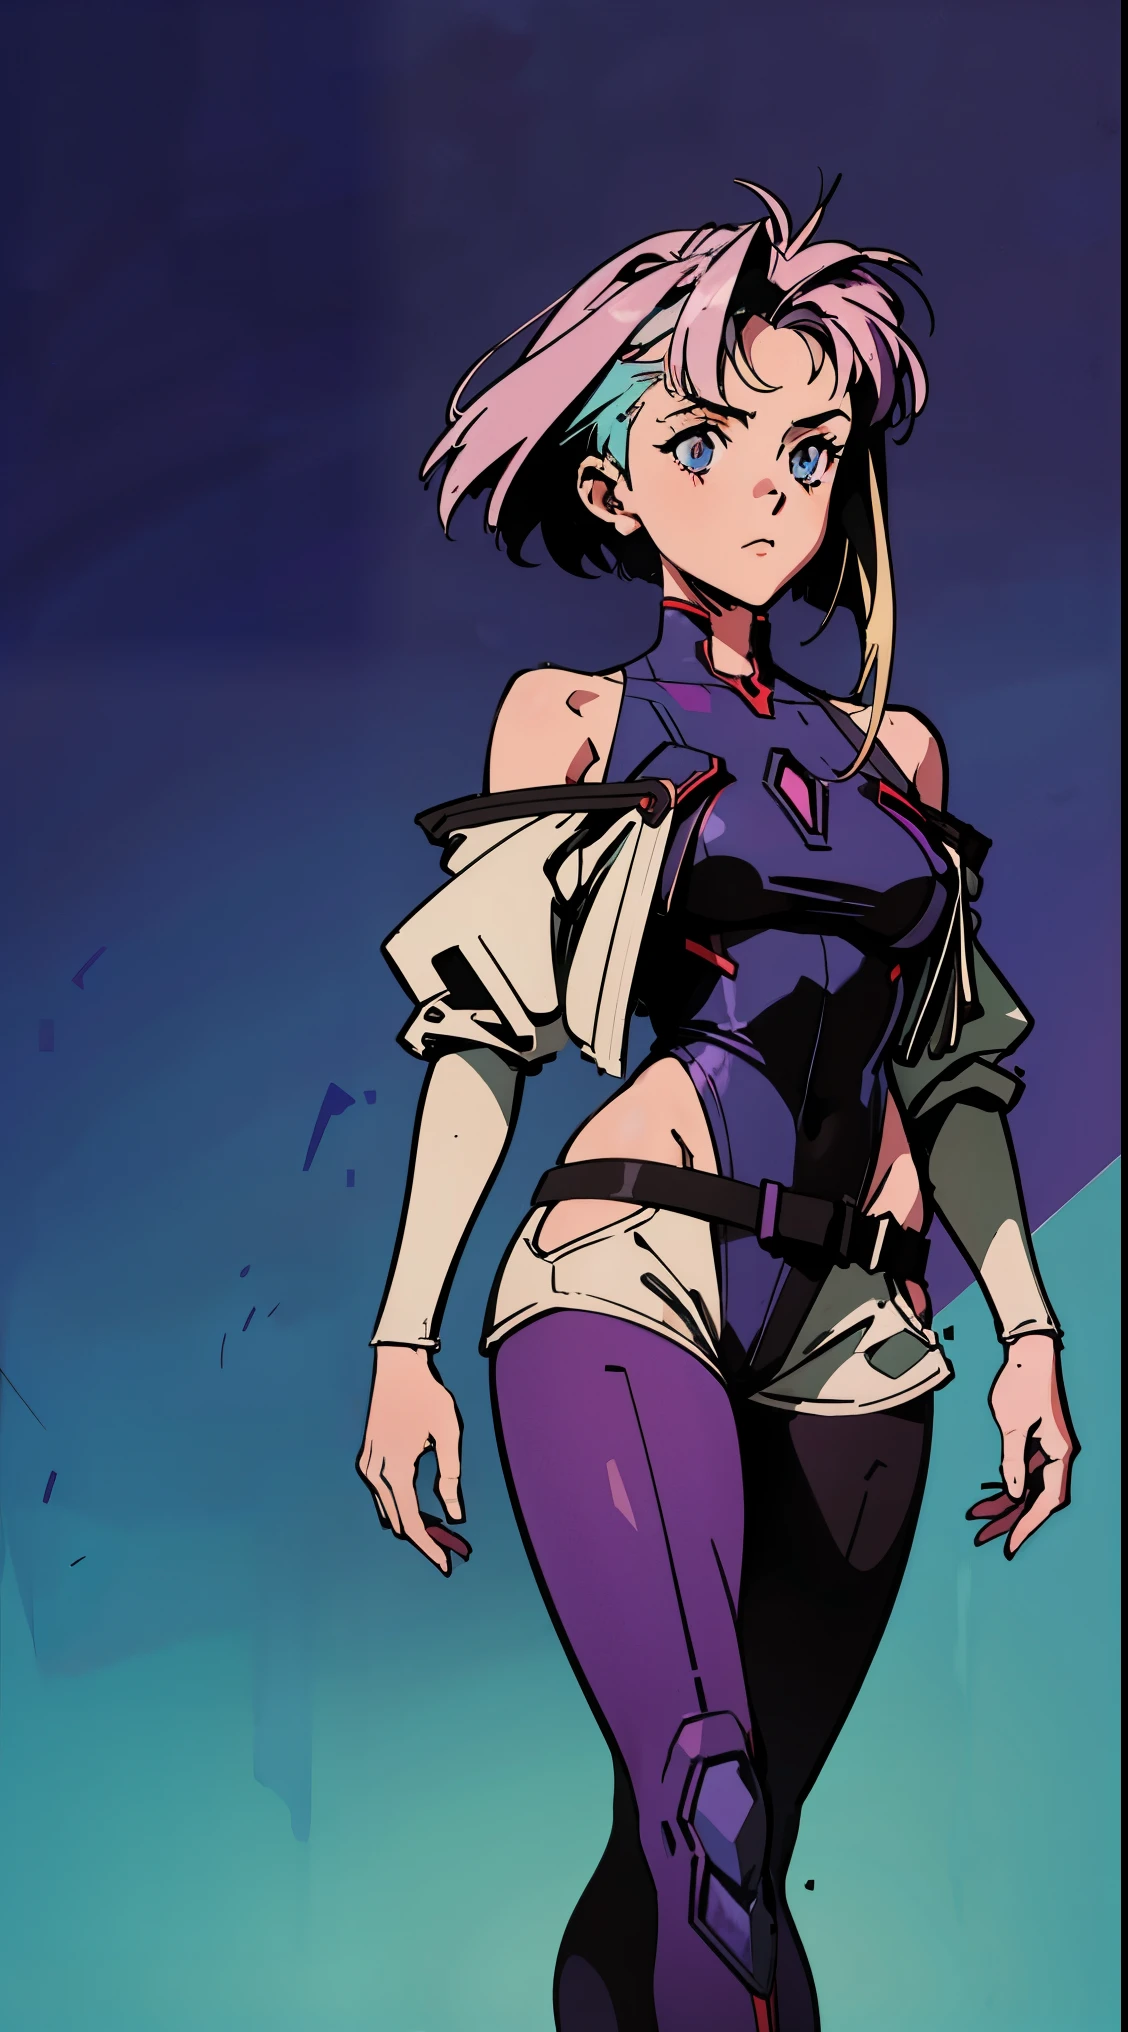 Highest image quality, 90s style anime, 21 year old girl, lucy \(cyberpunk\) Style, cyberpunk background